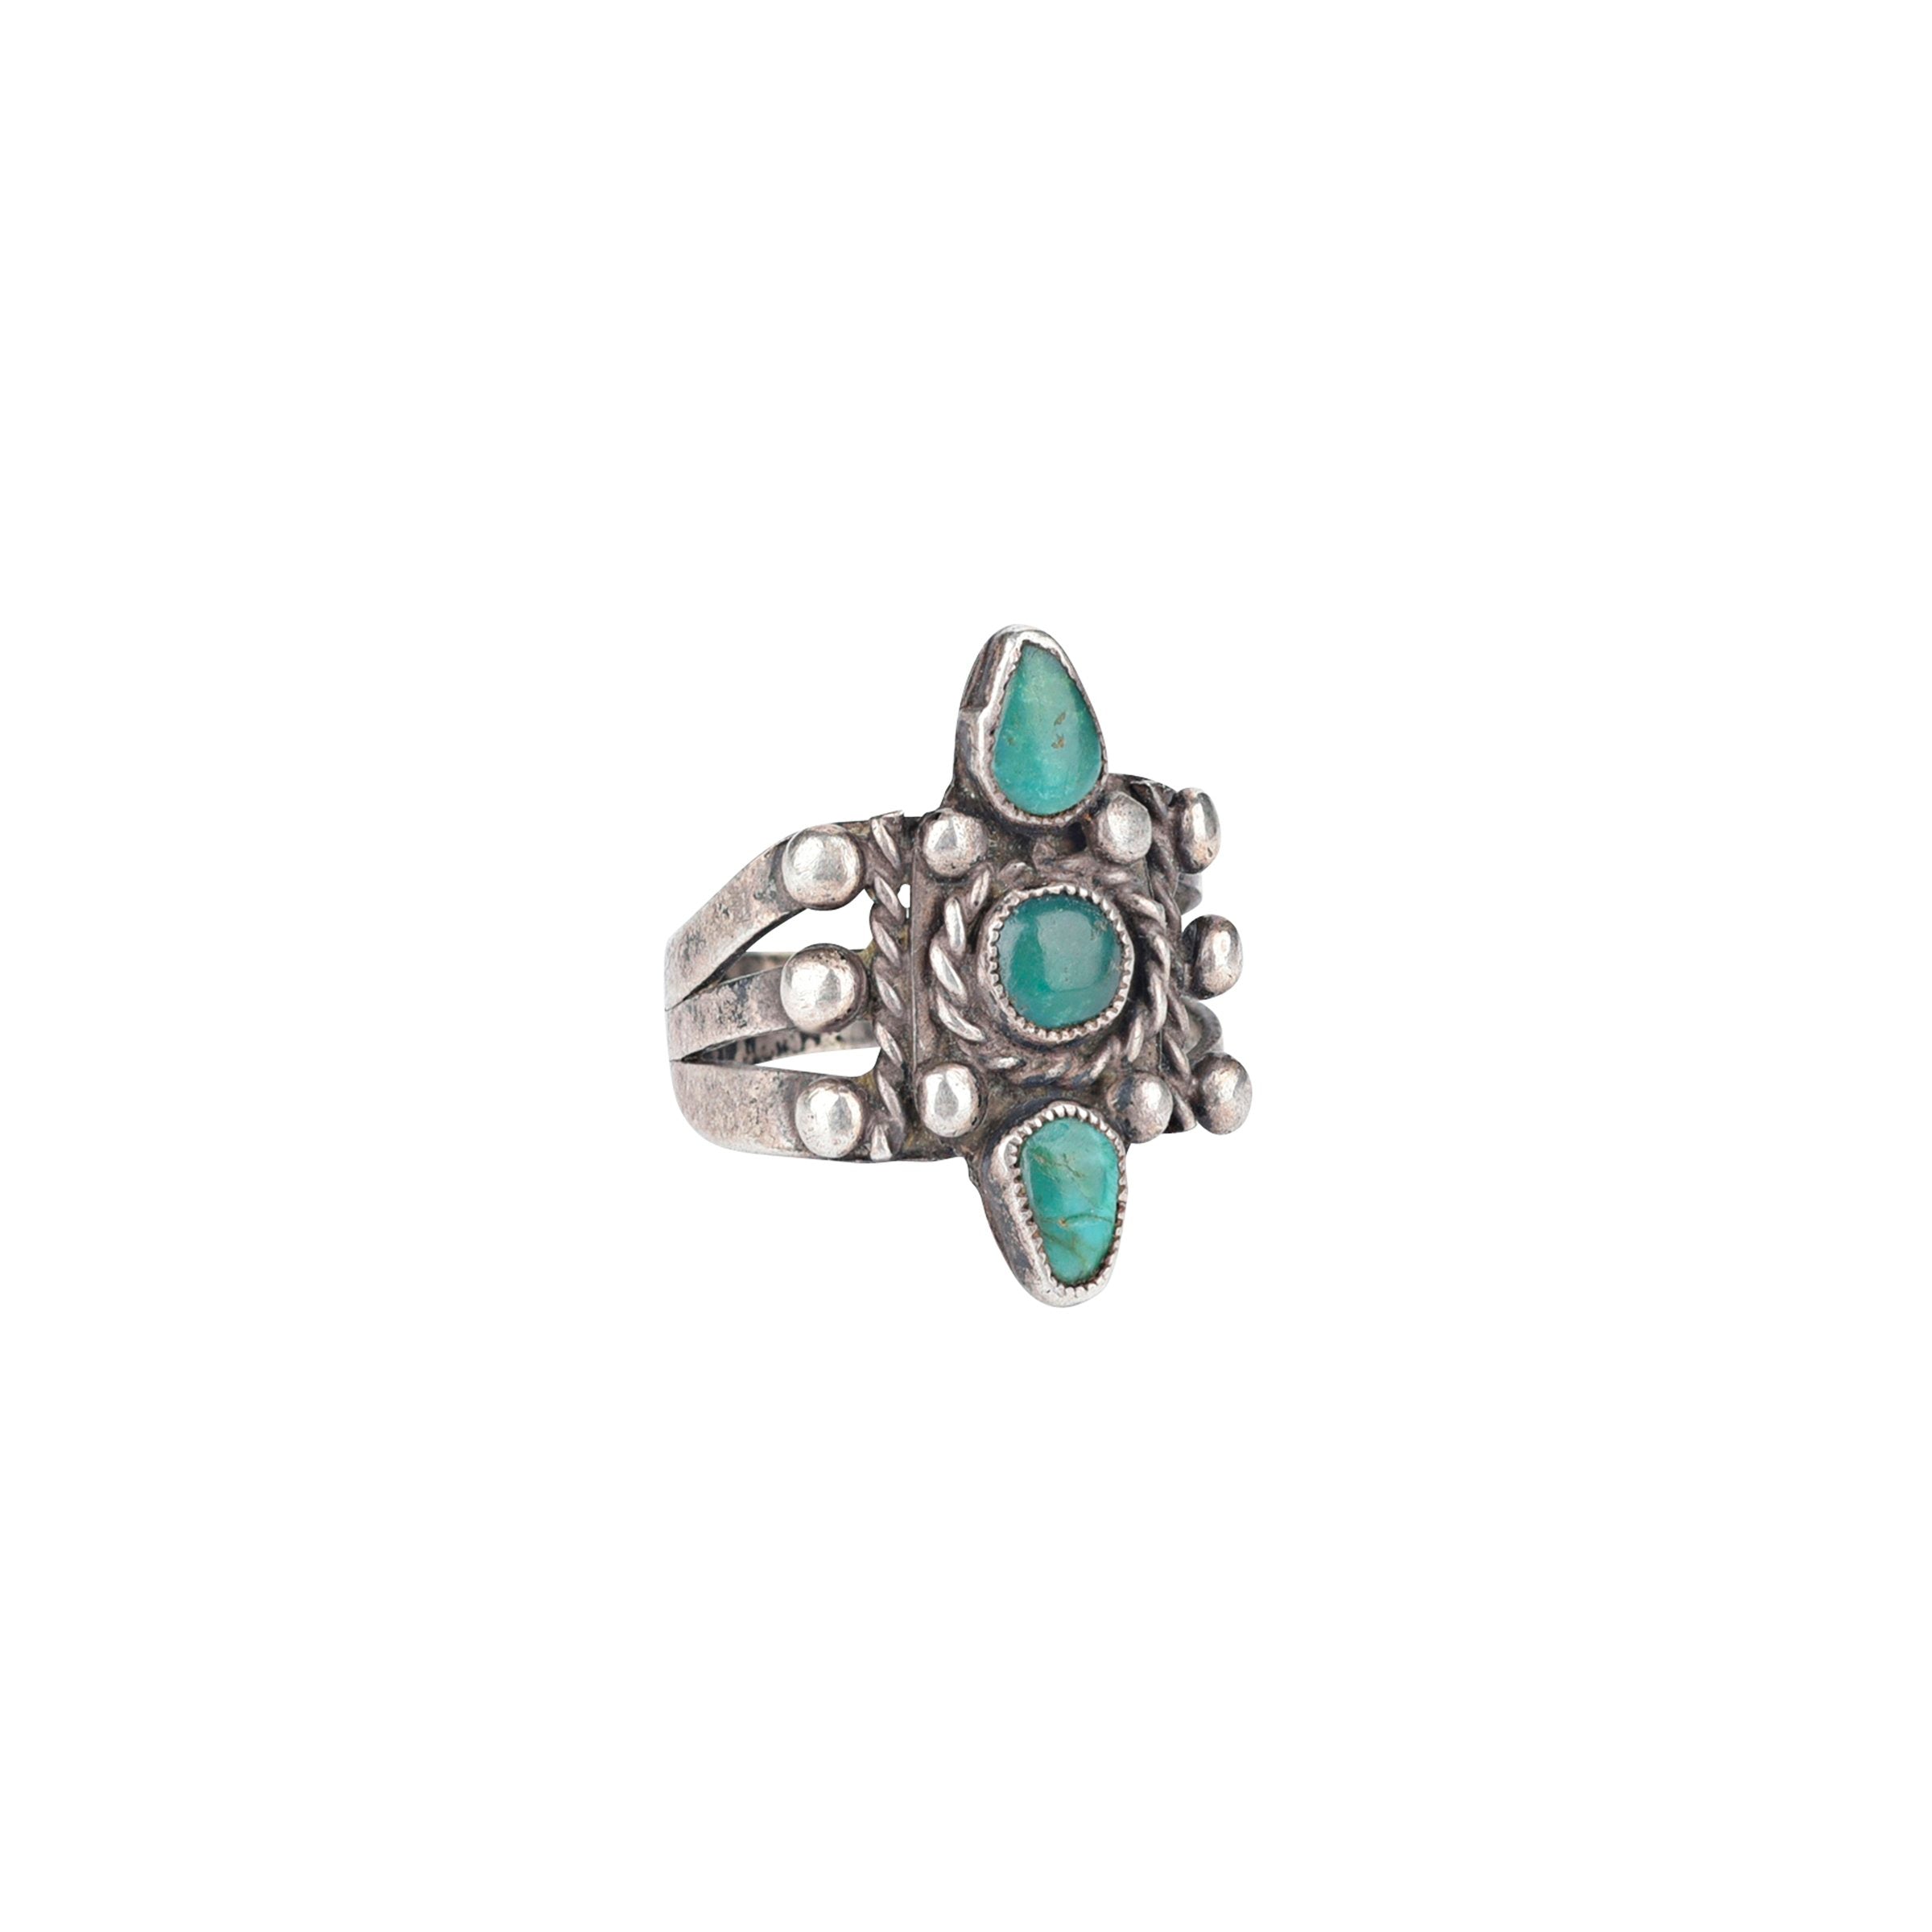 Vintage Navajo Turquoise Triad Ring - size 6 1/4